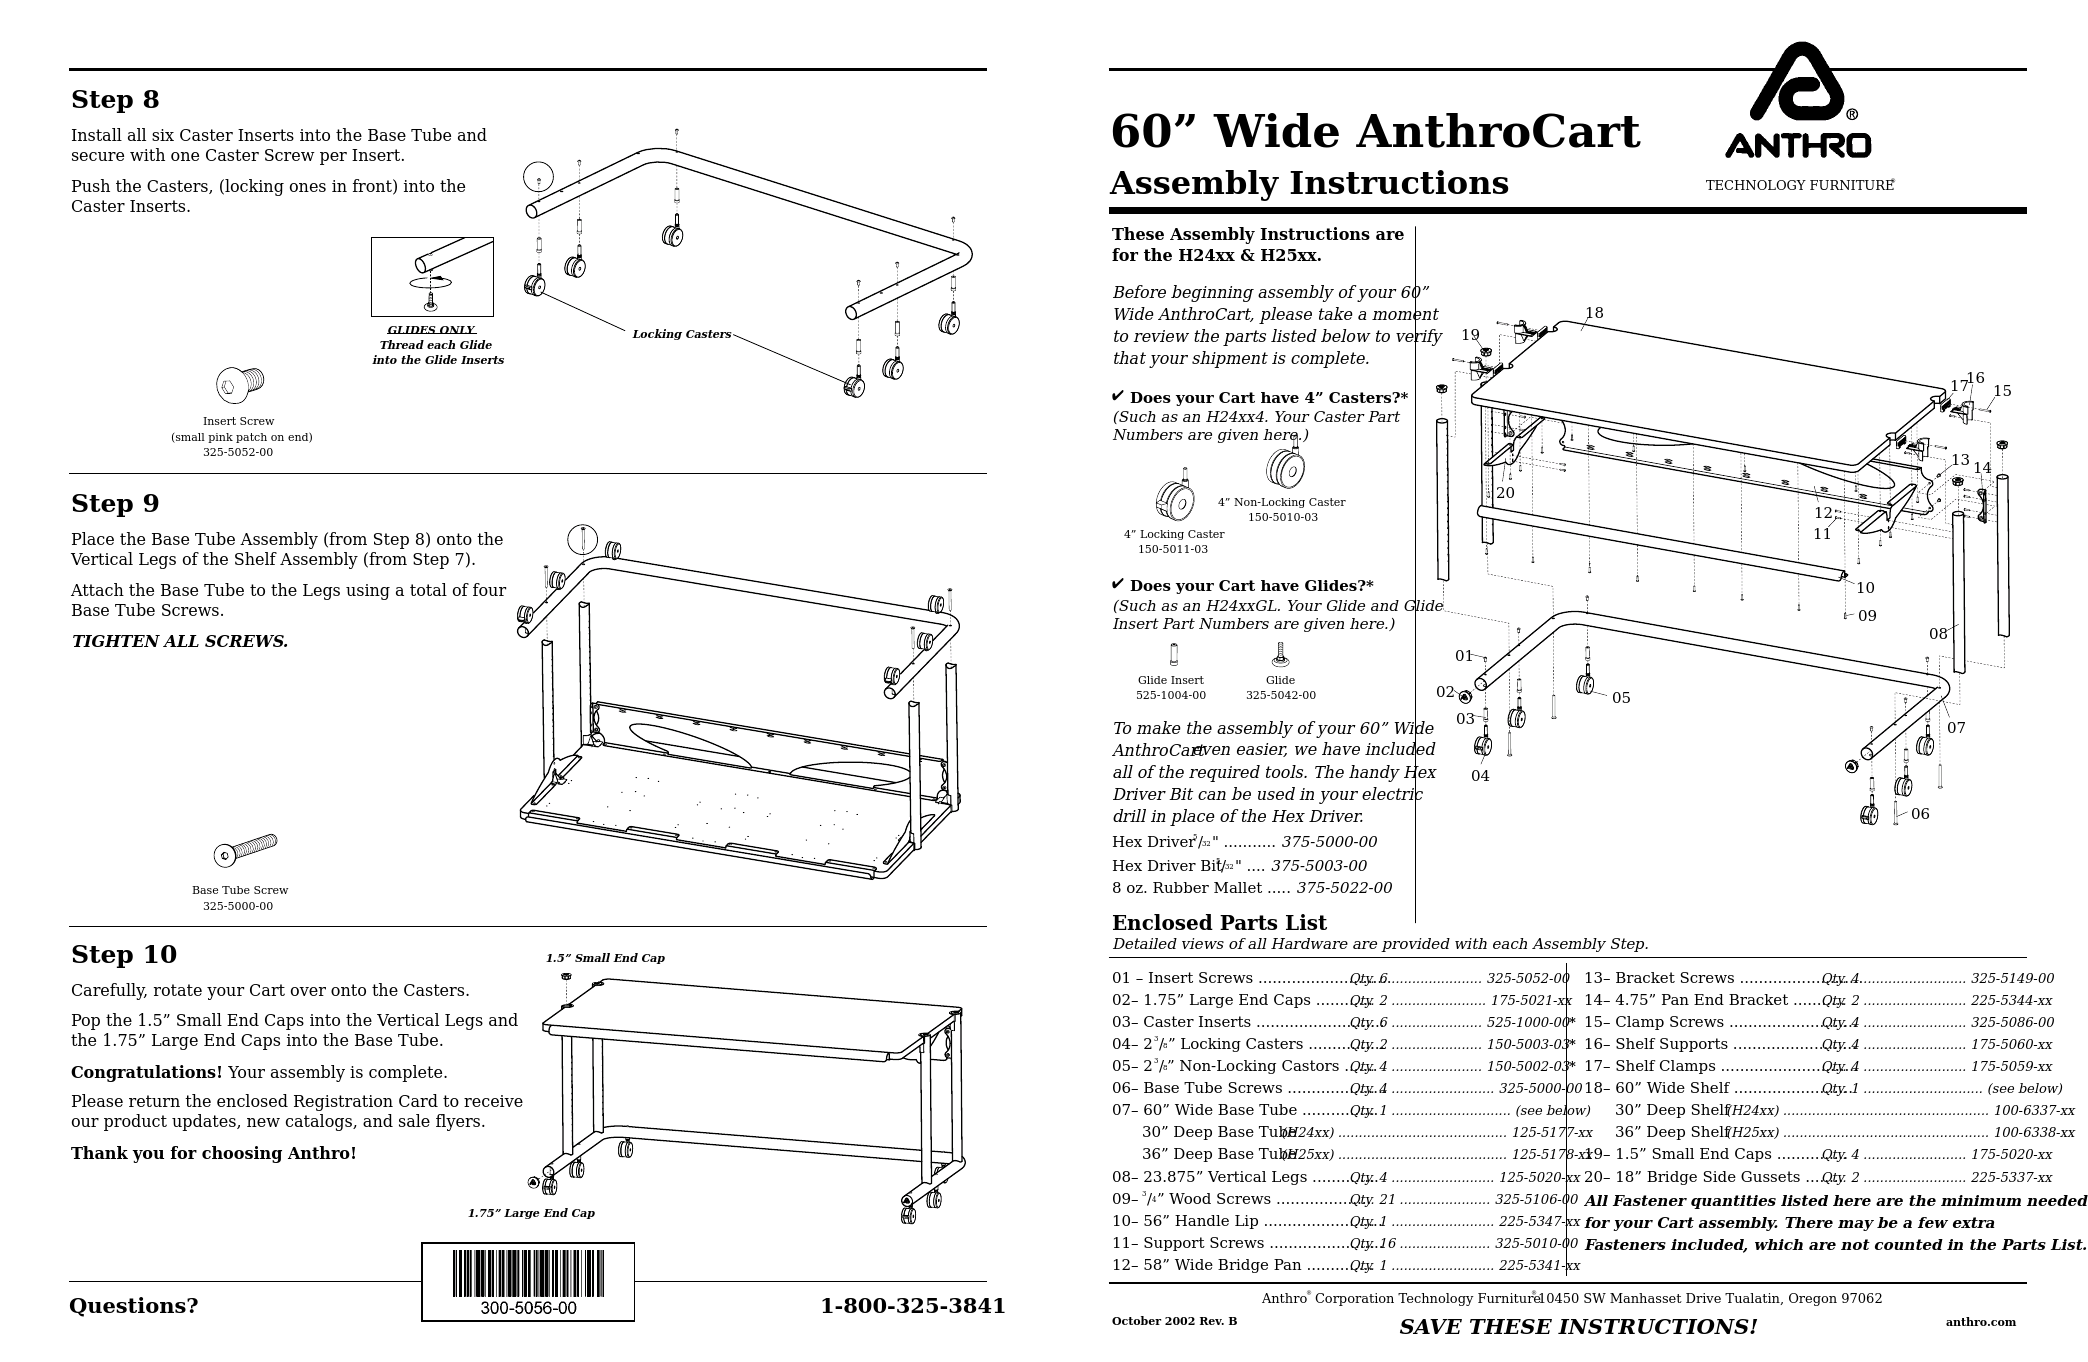 Large AnthroCarts 60W Assembly Instructions